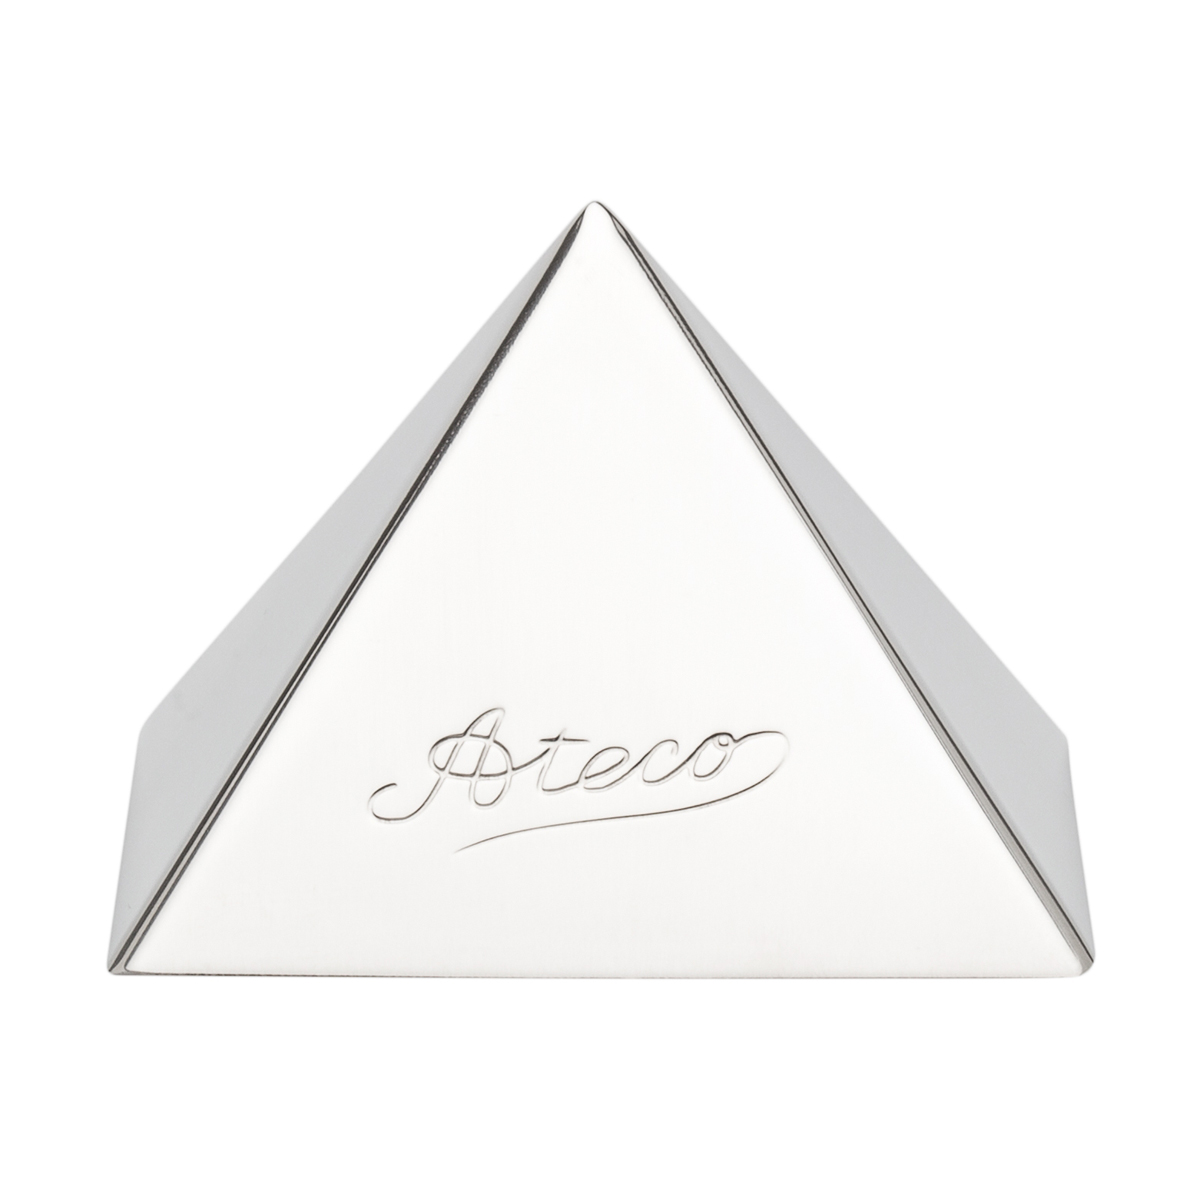 Ateco Pyramid Dessert Mold Stainless Steel, 2.25" Base x 1.50" high